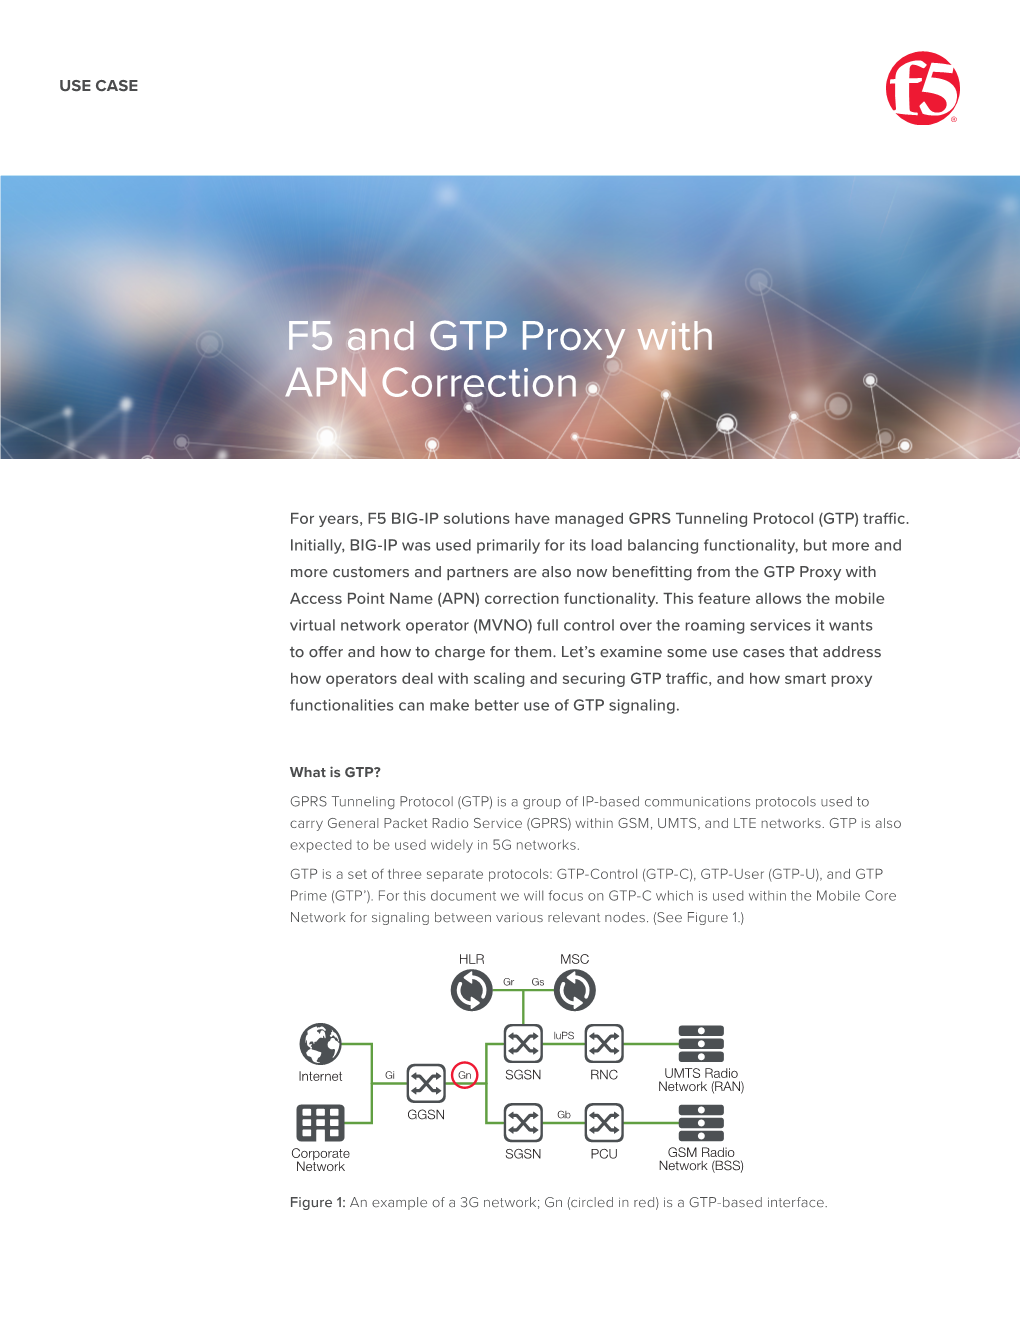 F5 and GTP Proxy with APN Correction